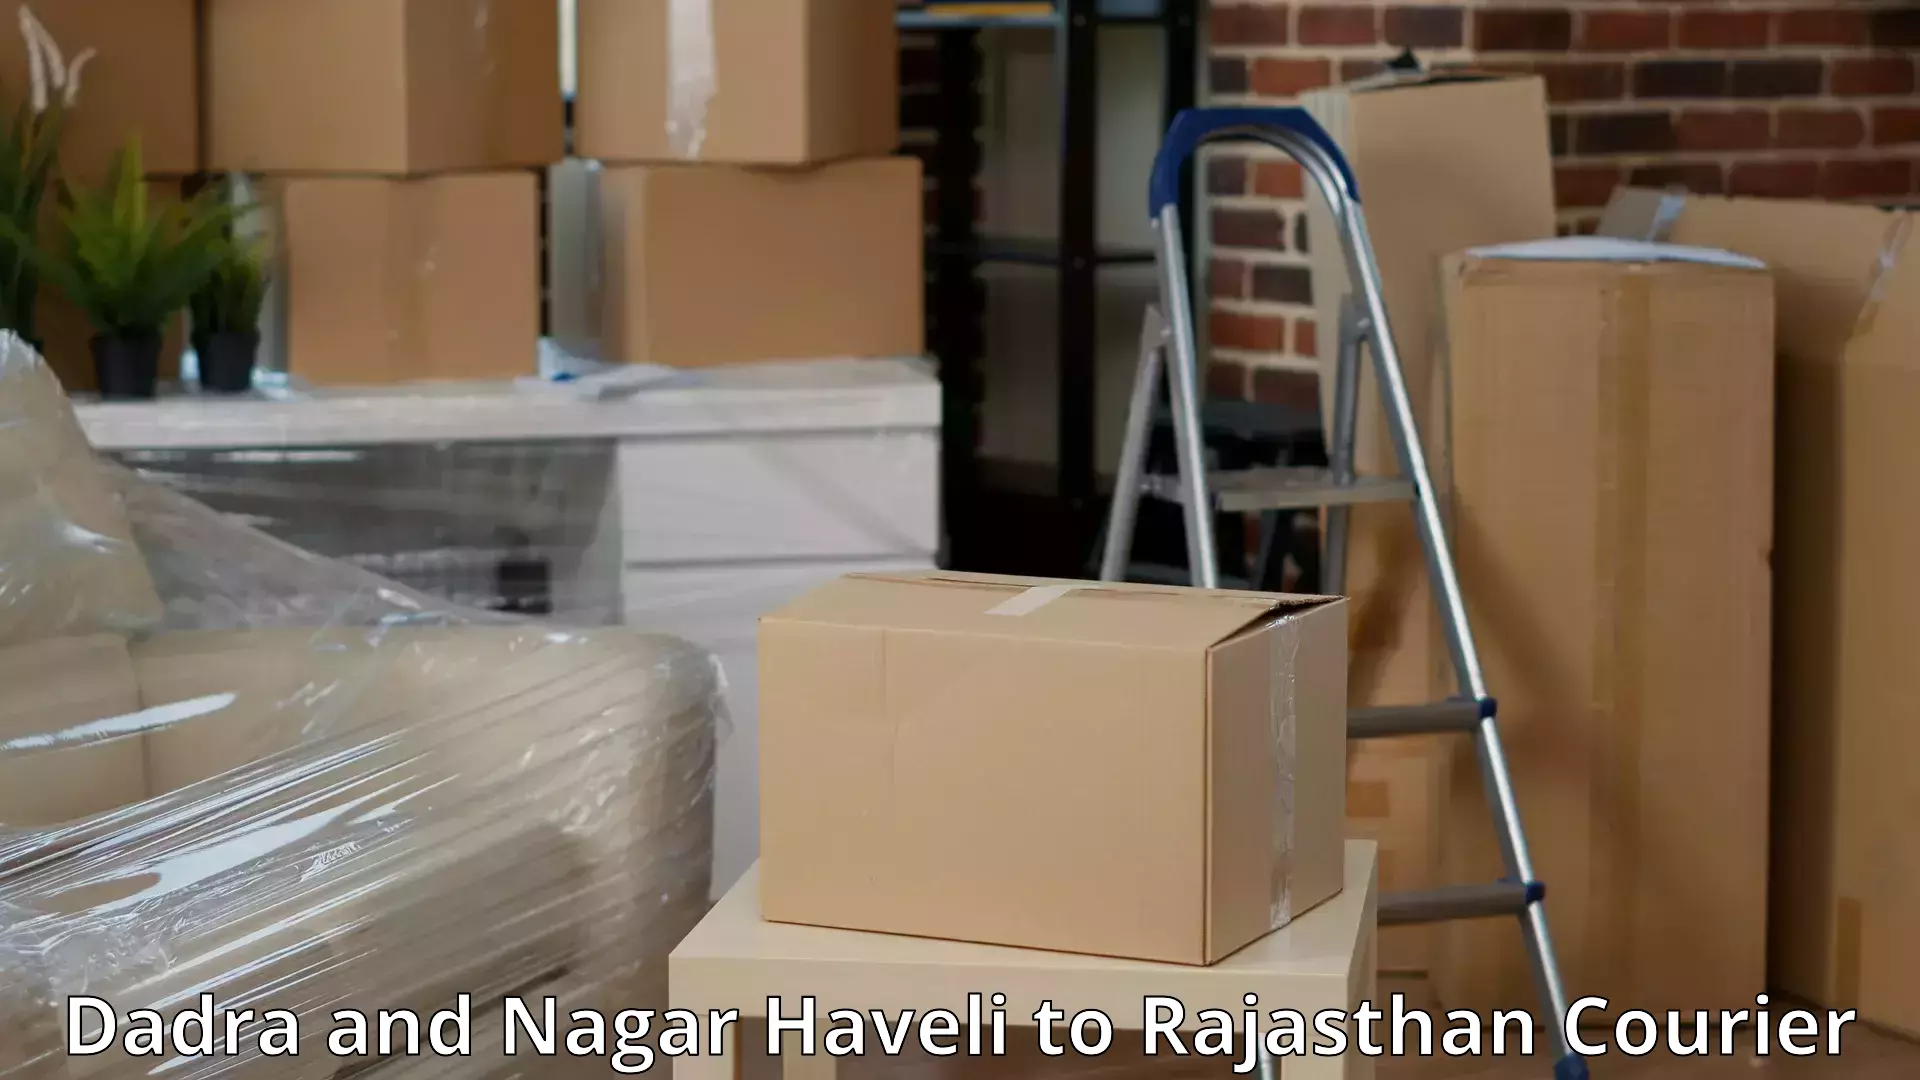 Furniture moving specialists Dadra and Nagar Haveli to Malsisar